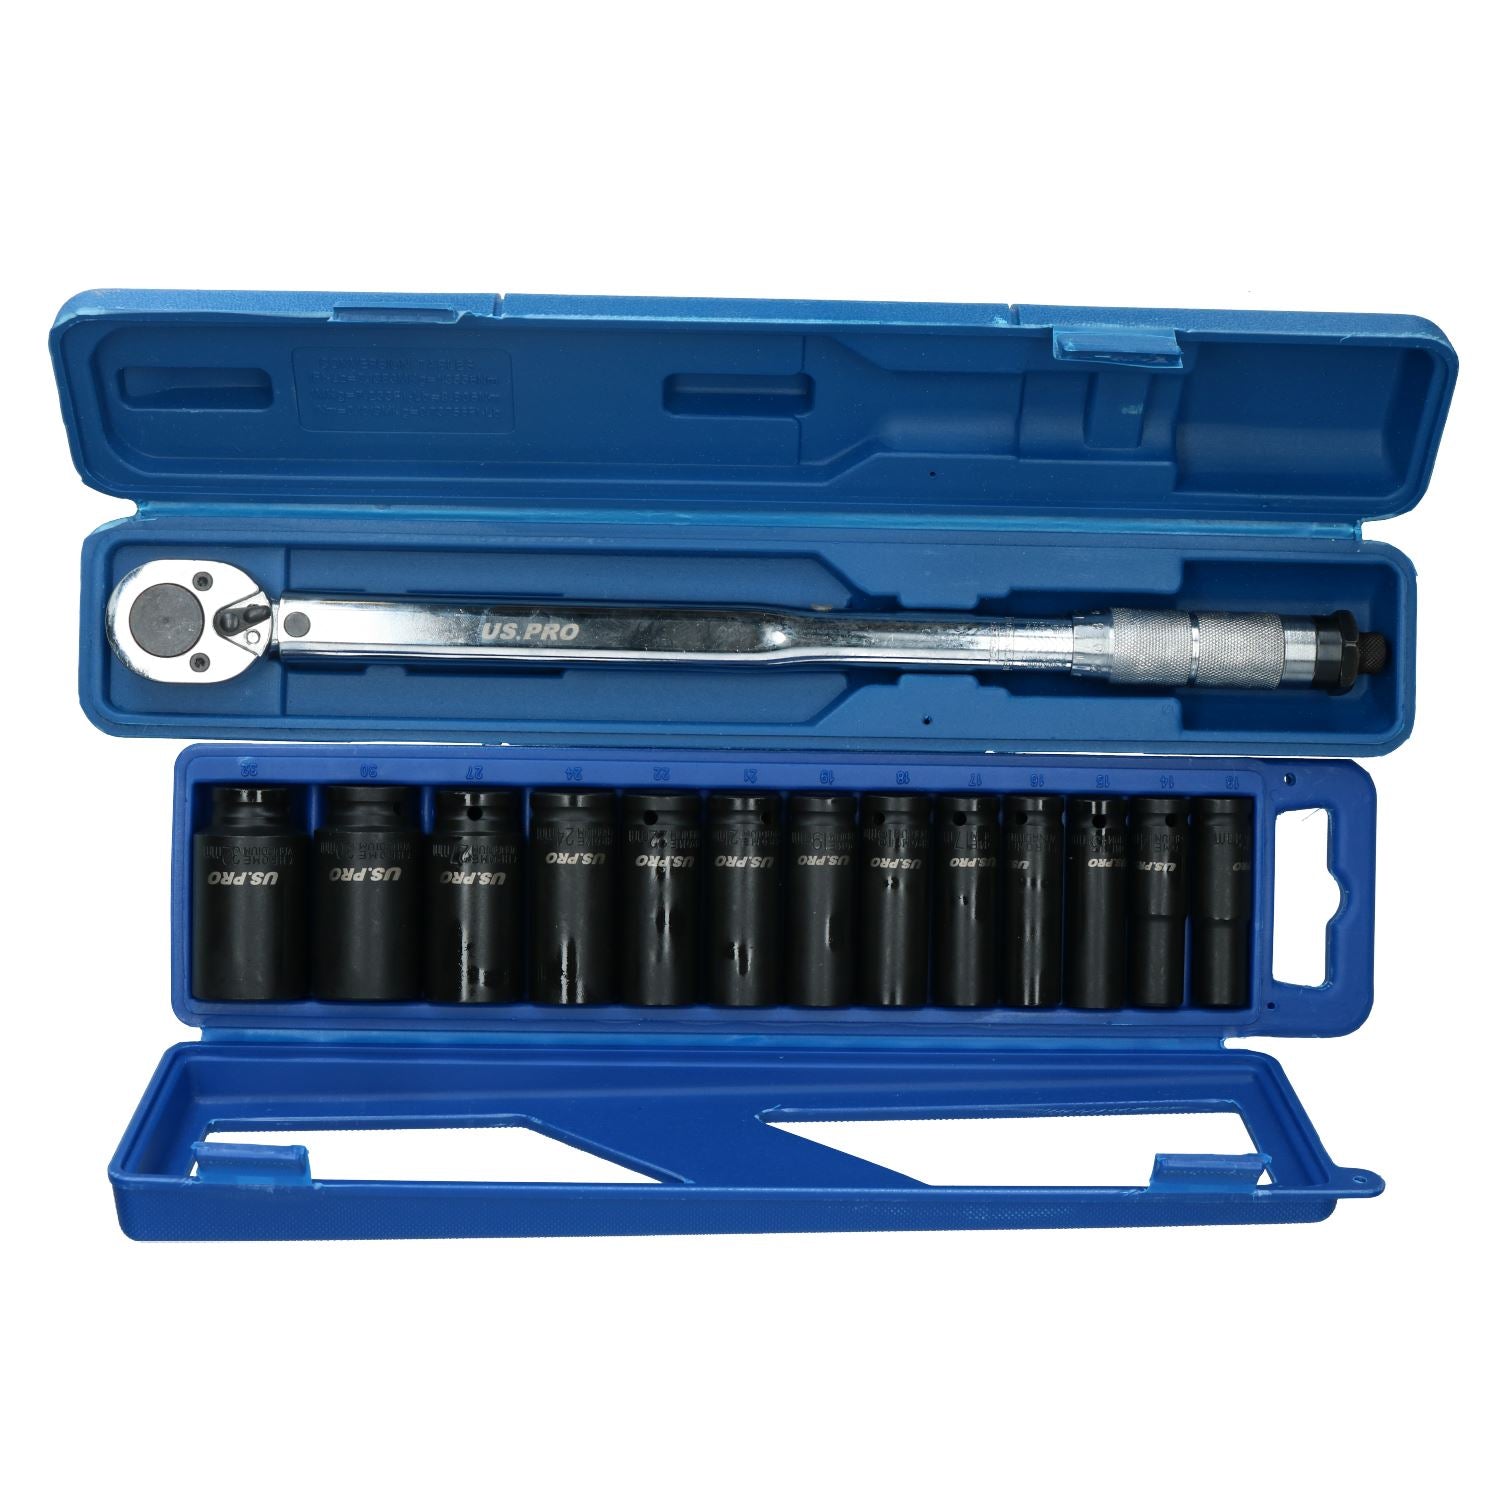 1/2" Drive Torque Wrench 28 - 210Nm with 13 Deep Impact Sockets 13 - 32mm